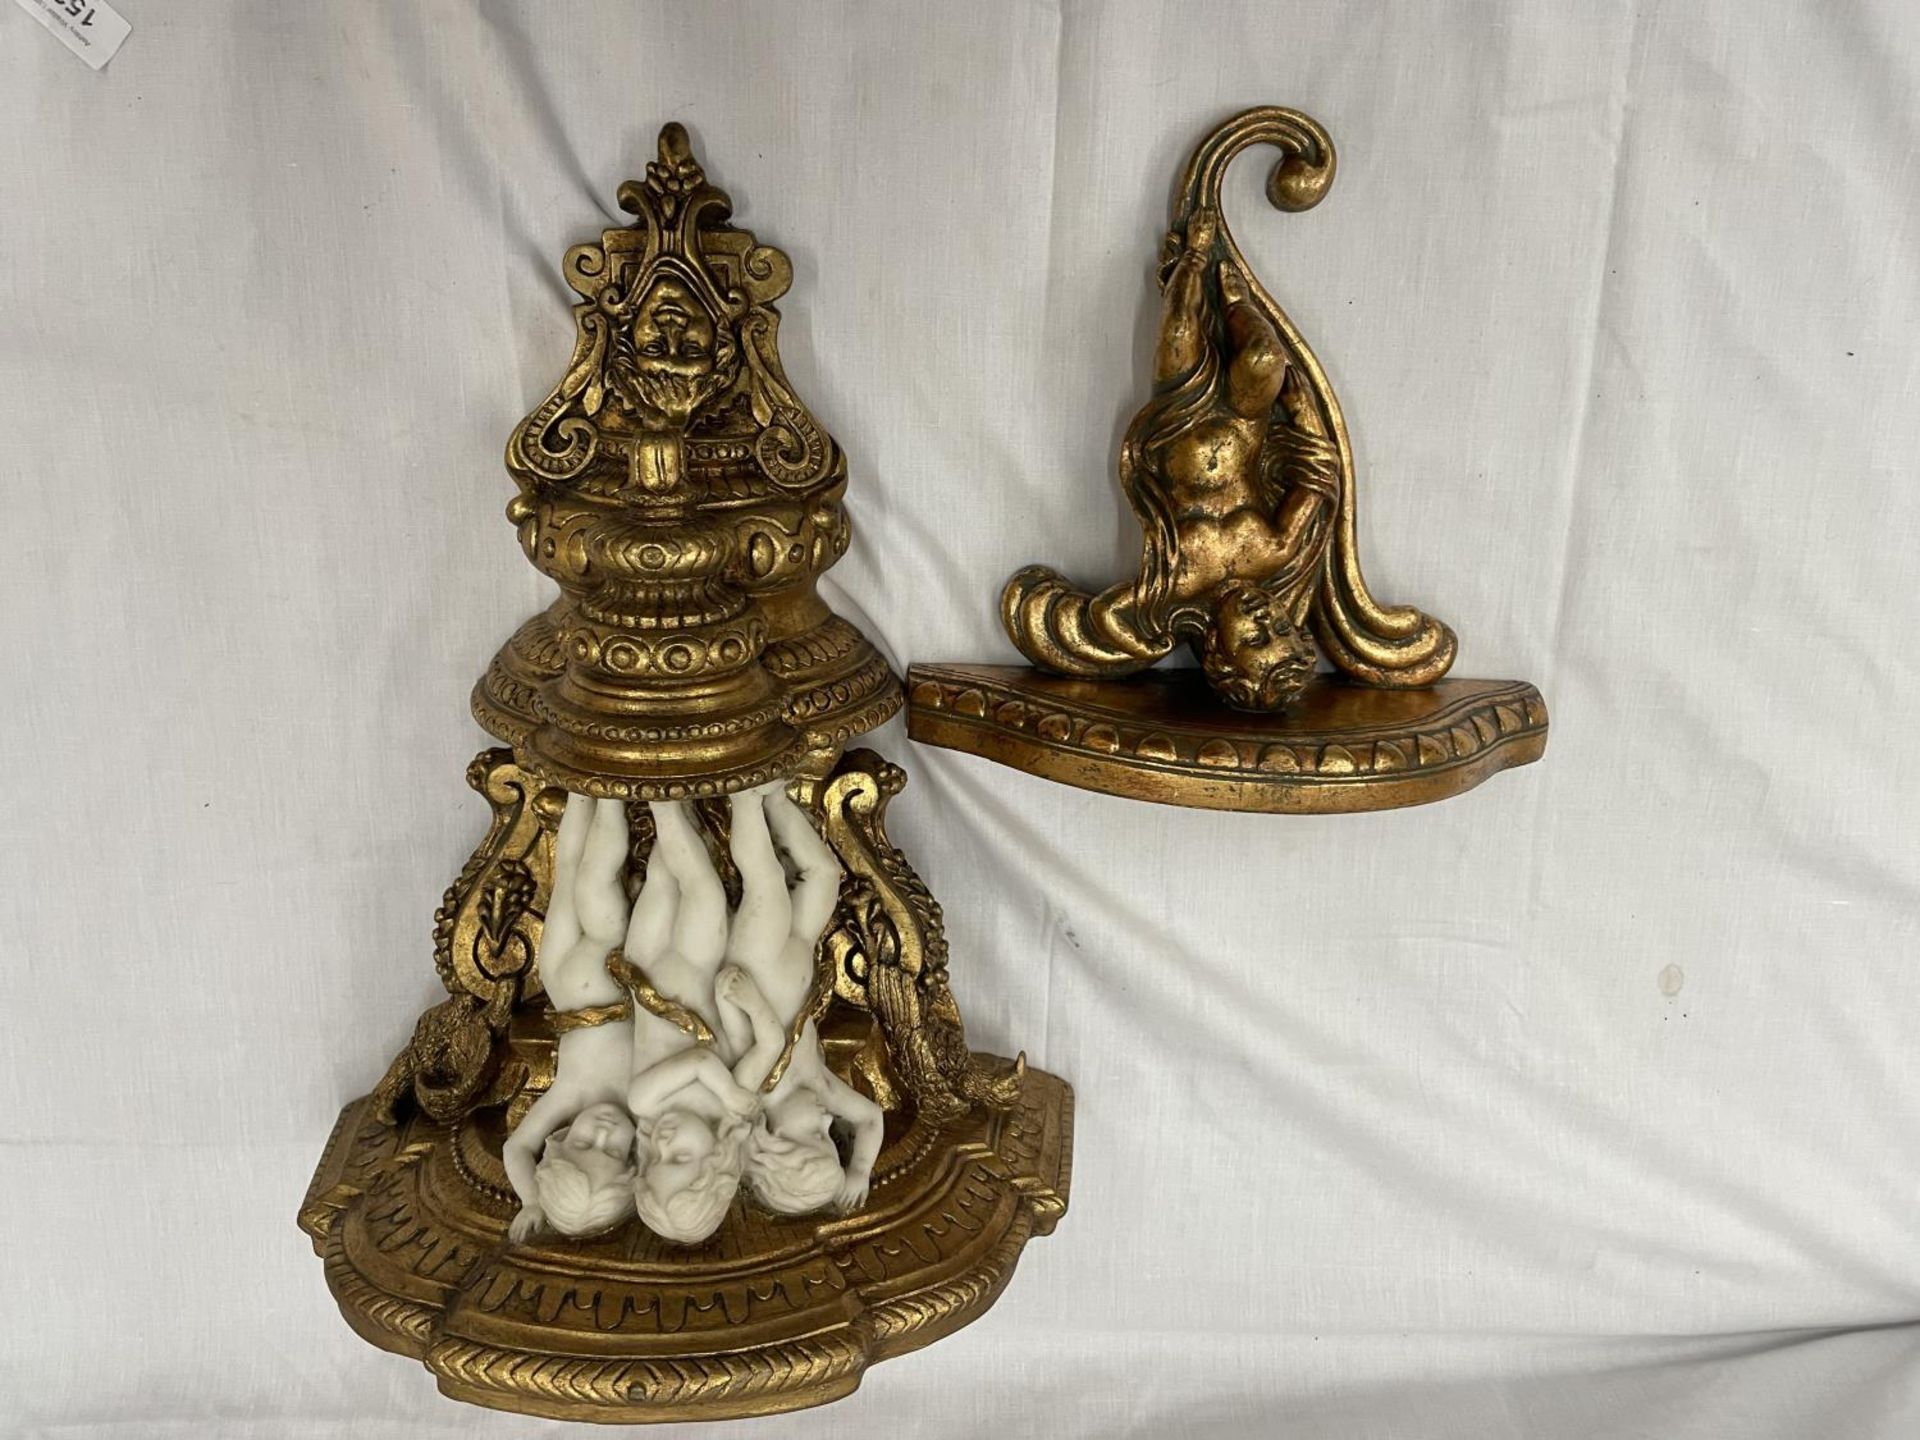 A LARGE GILDED WALL SCONCE WITH ELABORATE DECORATION AND CHERUBS HEIGHT 45CM, WIDTH 31CM, A GILDED - Image 2 of 6